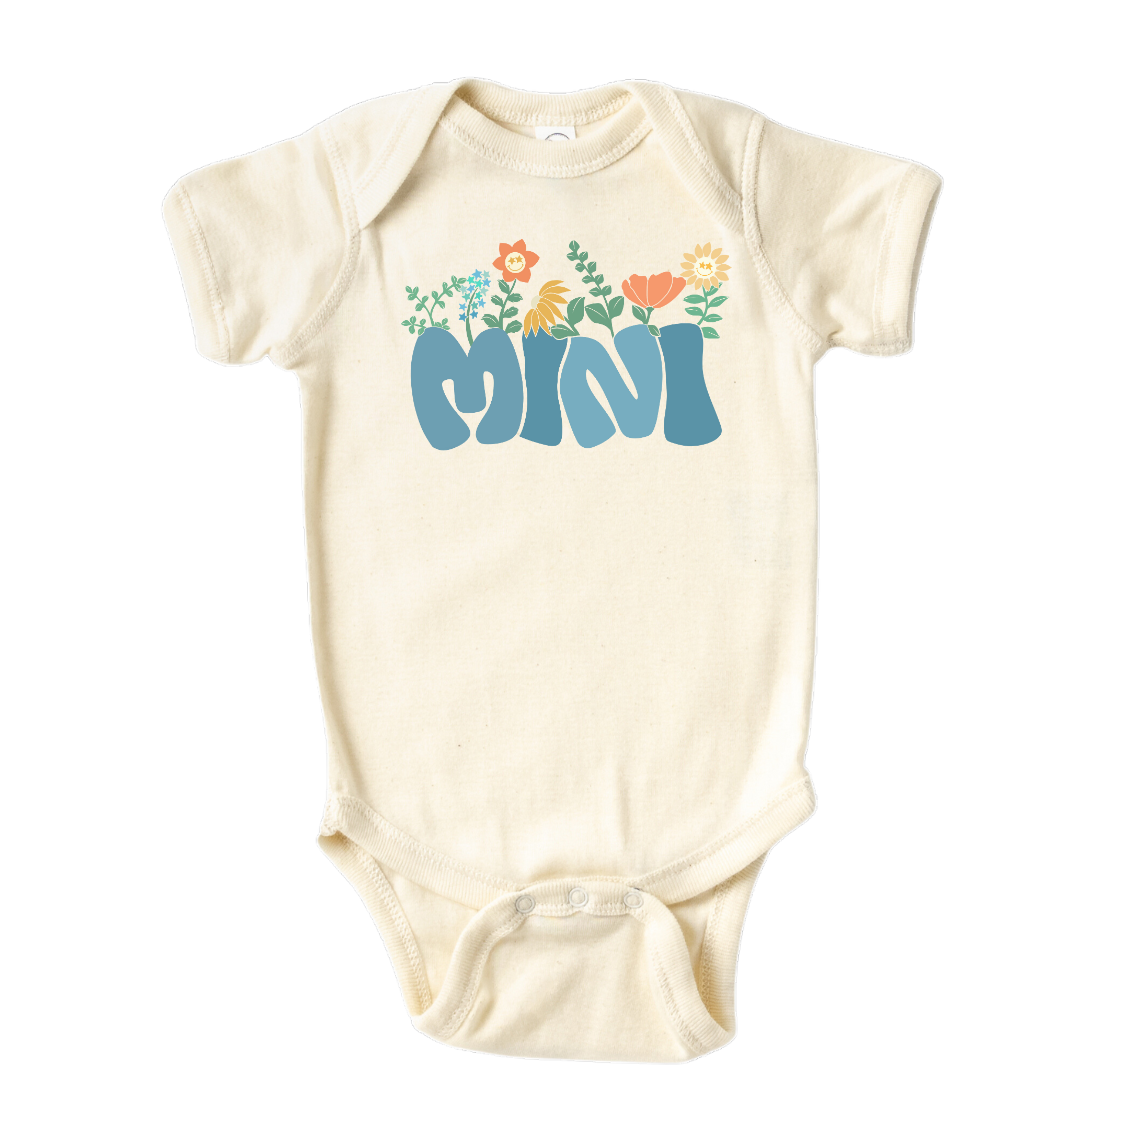 Natural Bodysuit with a retro blue printed graphic of the text 'Mini.' This trendy design adds a playful and vintage touch to your child's outfit.